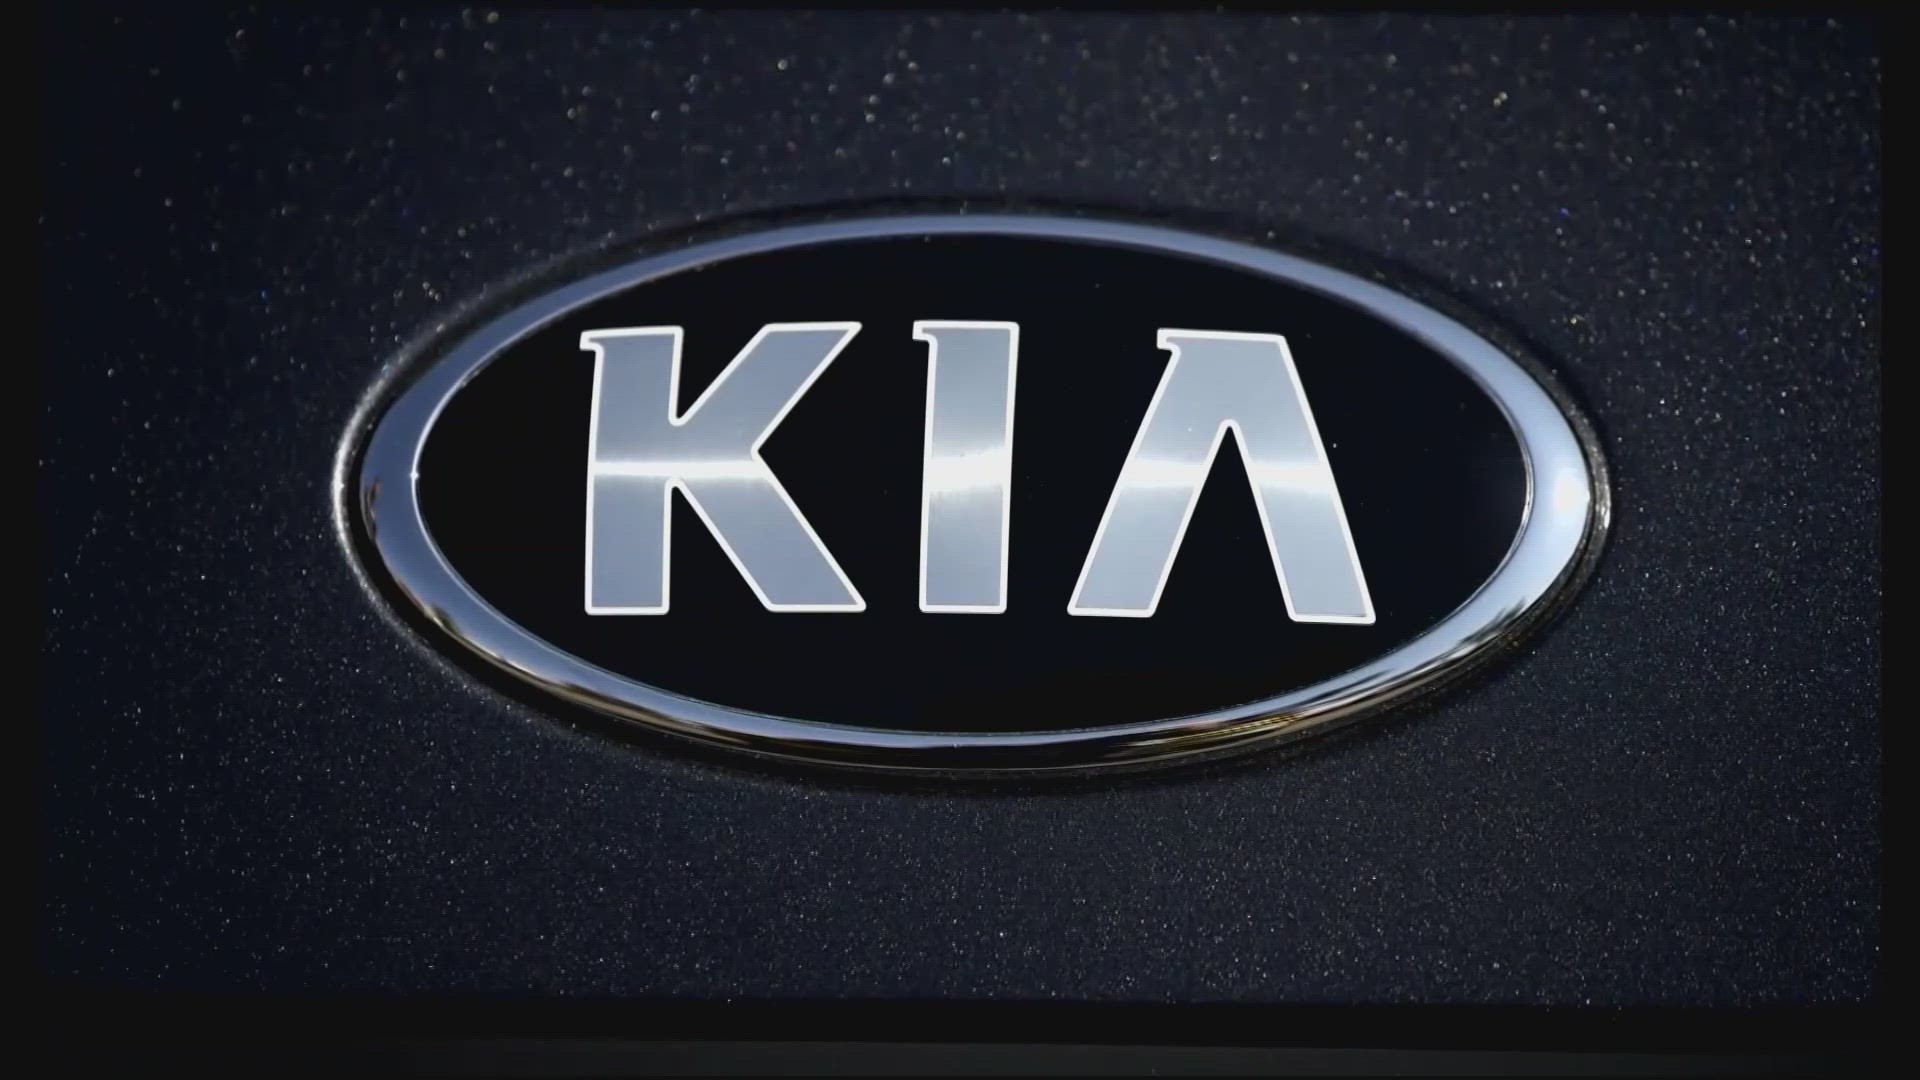 Nearly two dozen state attorneys general have sent a letter to Hyundai and Kia demanding they take action to stop a rash of car thefts.